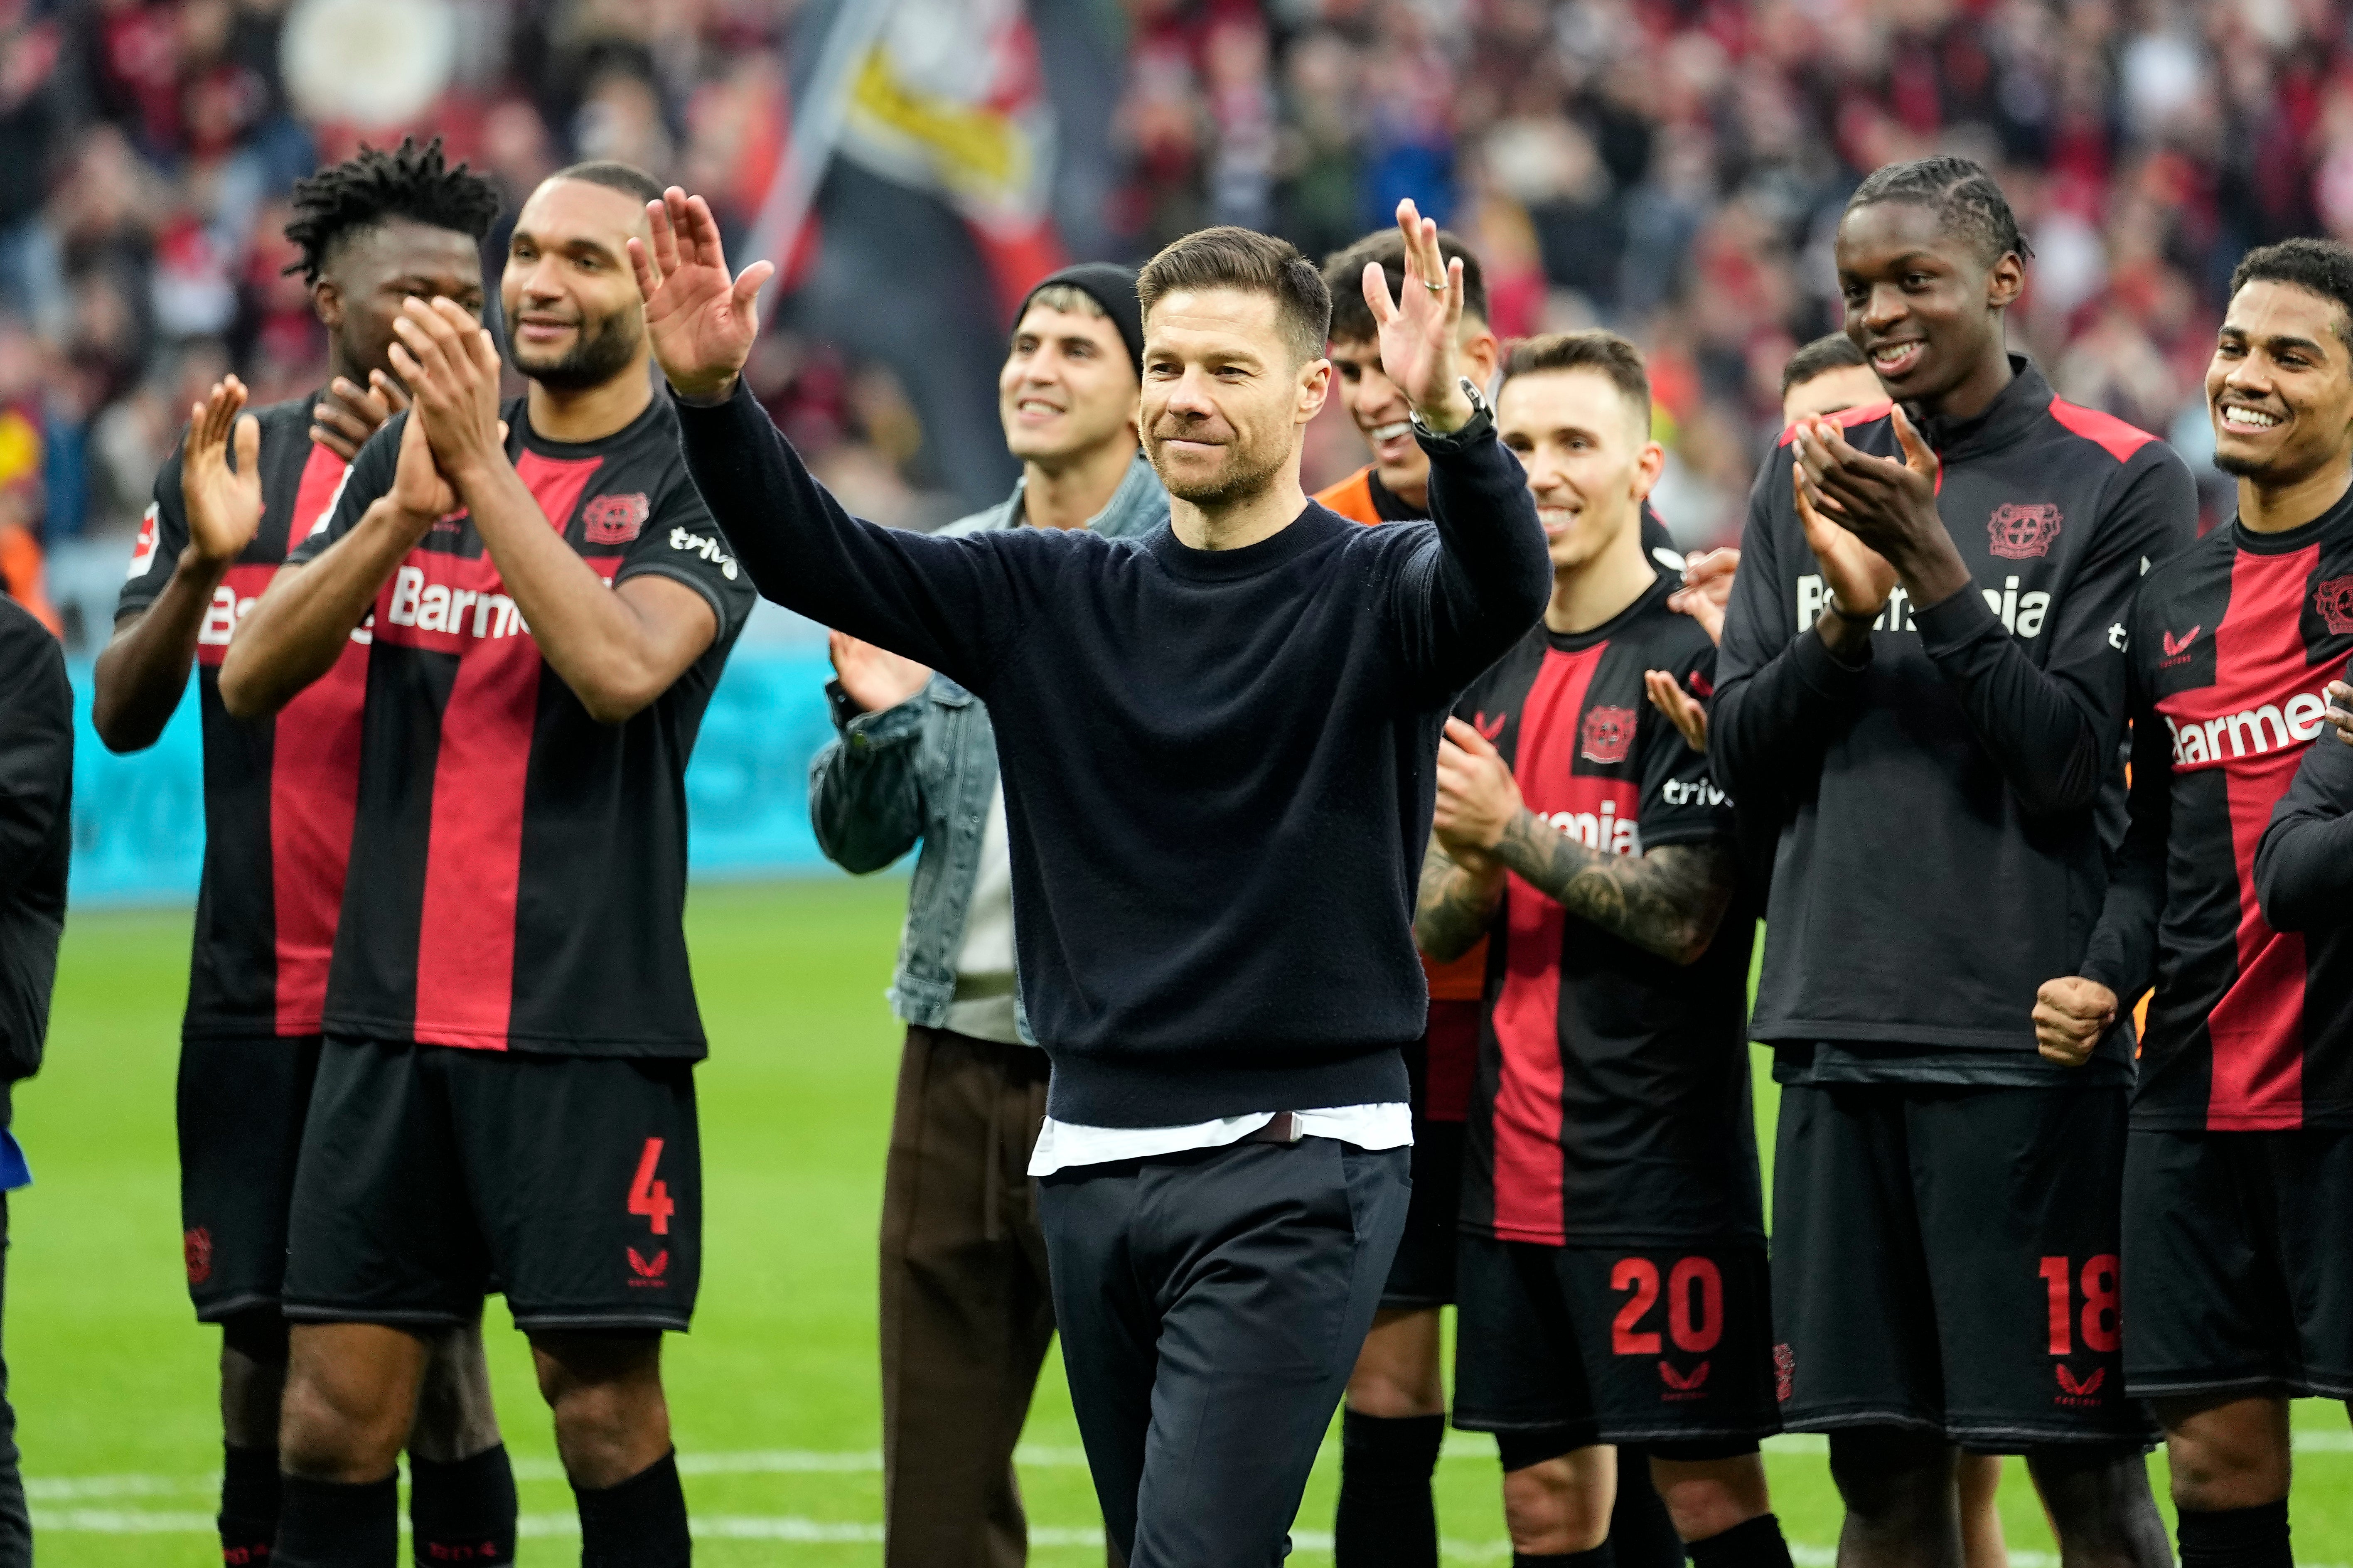 Bayer Leverkusen coach Xabi Alonso was a key player in Bayern Munich’s most successful era but is set to end their 11-year stint as Bundesliga champions